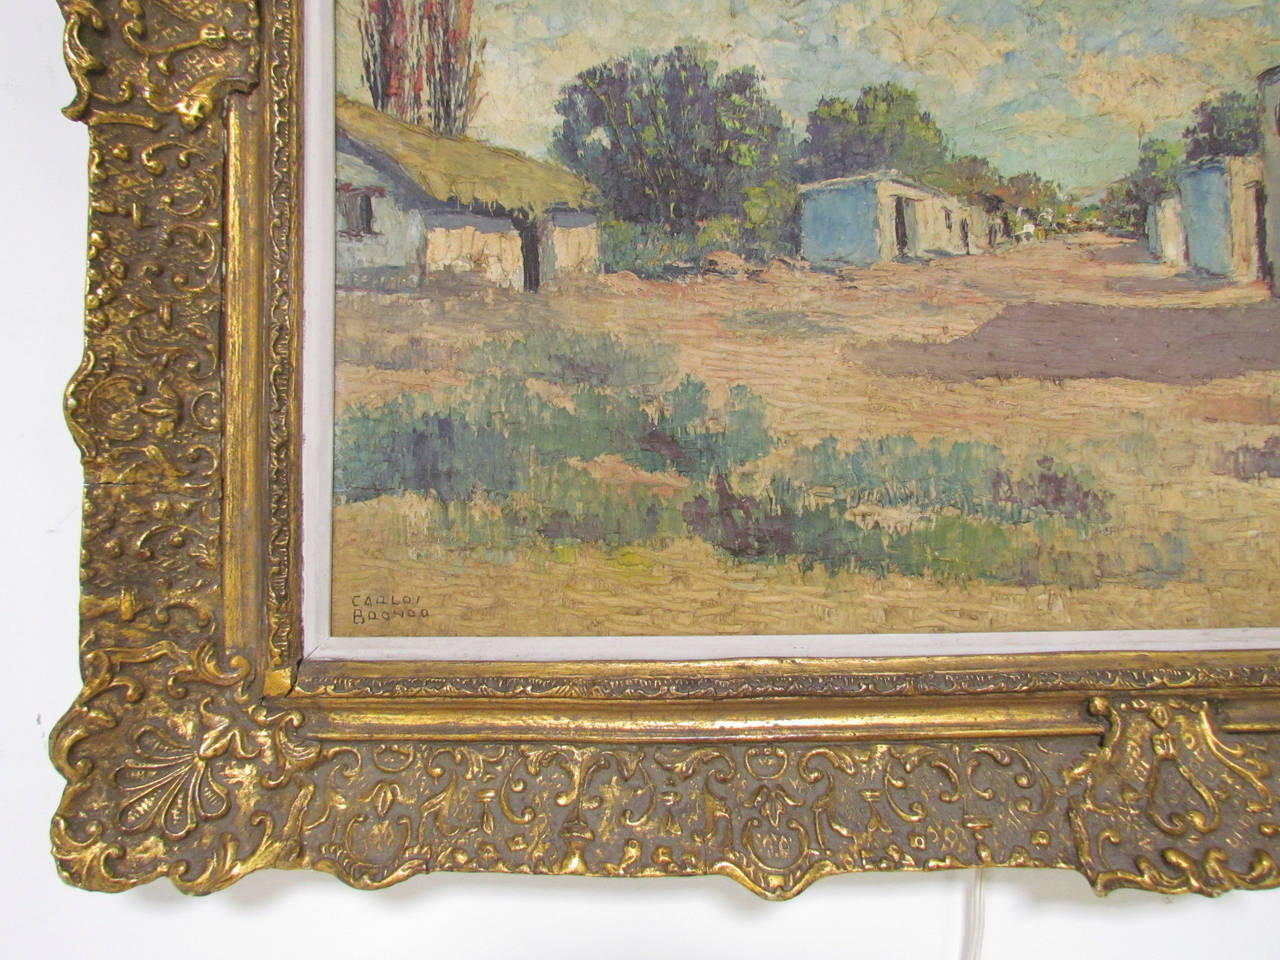 Argentine Mid-Century Impressionist Style Oil Painting by Argentinian Carlos Brondo